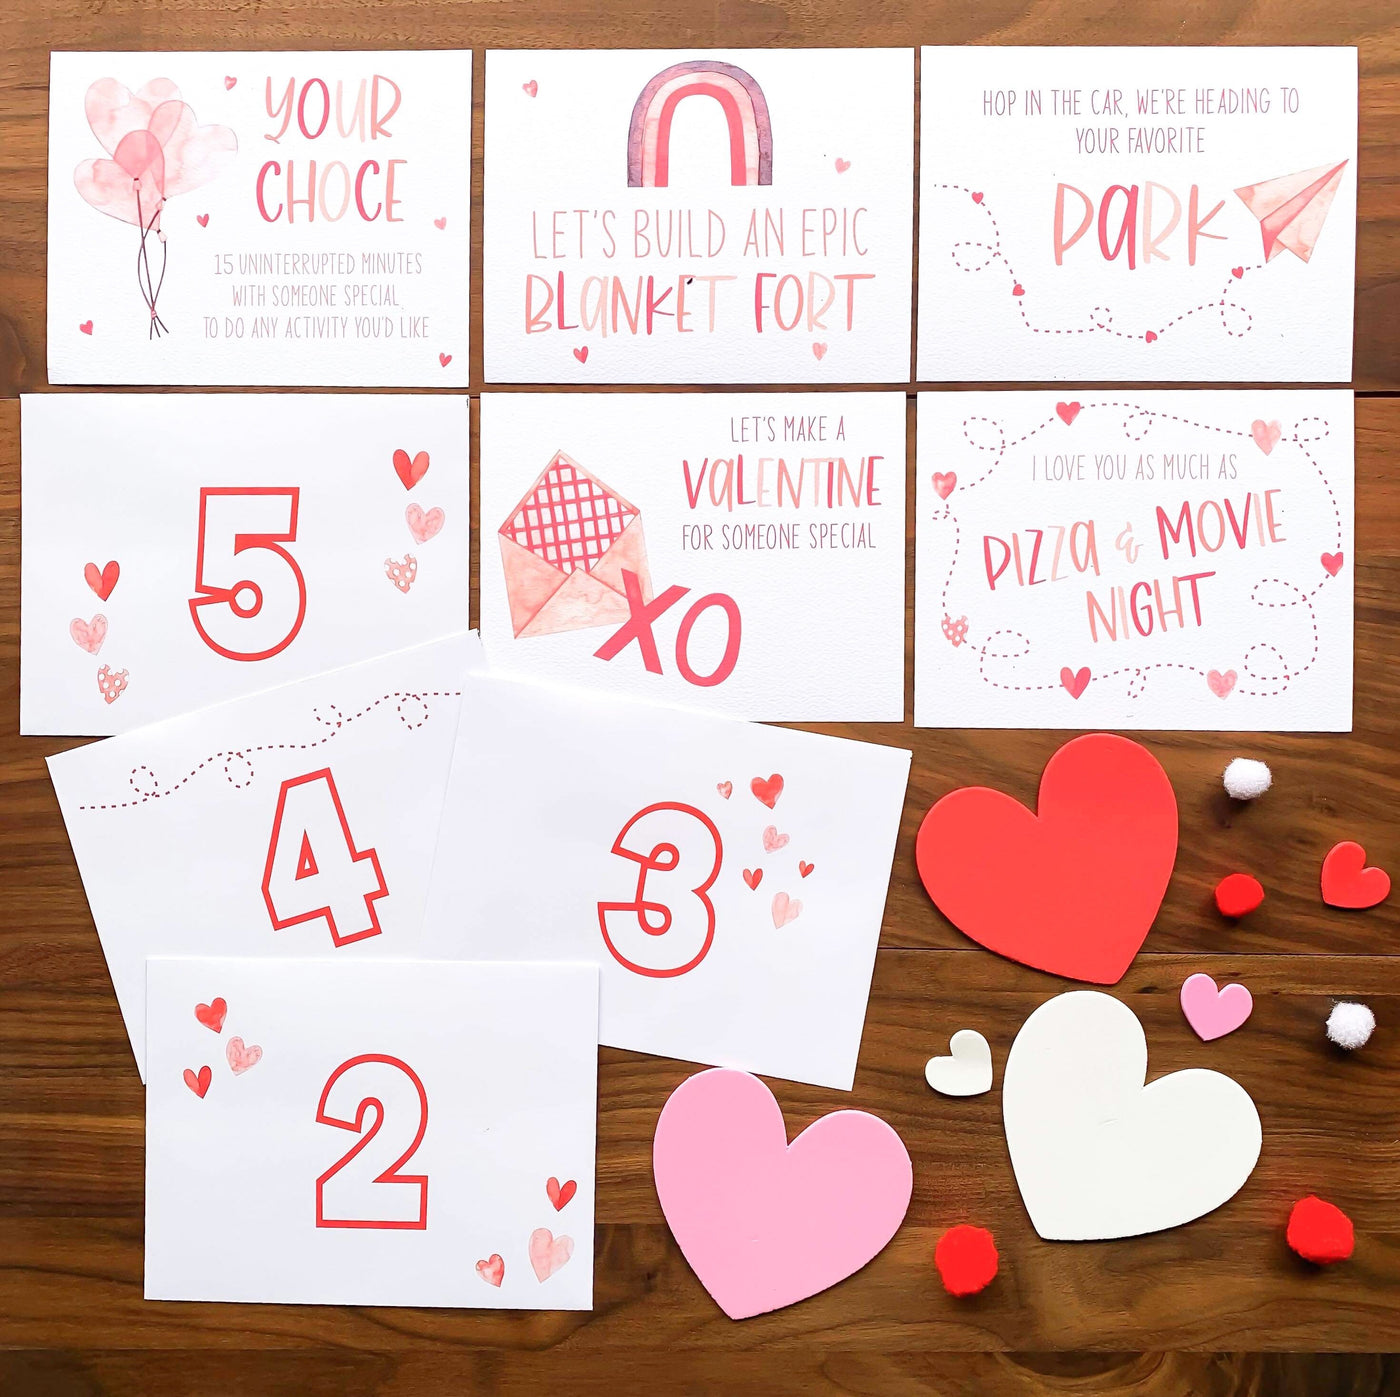 Valentines Coupon Book, Valentines for kids, Valentines gift for kids, Valentines activity cards, Valentines ideas for kids, Valentines Kids